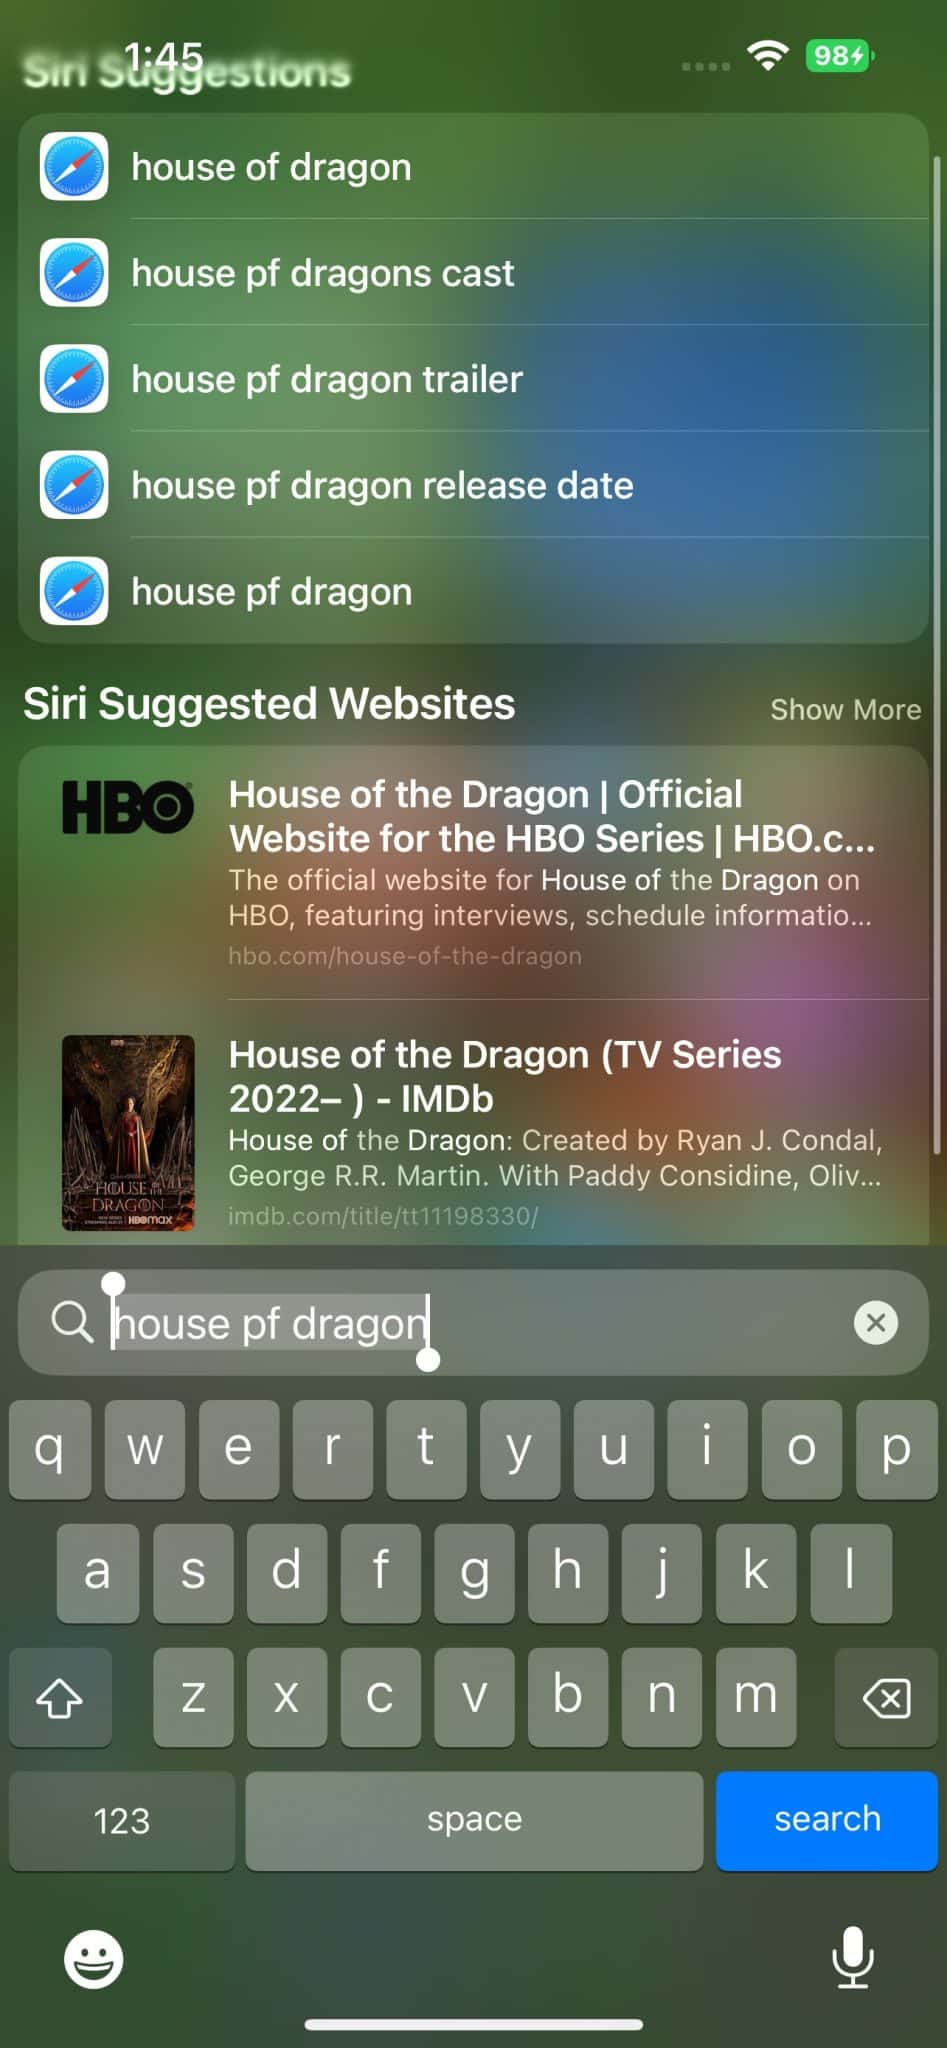 Searching for Shows and Movies in Spotlight search on iPhone